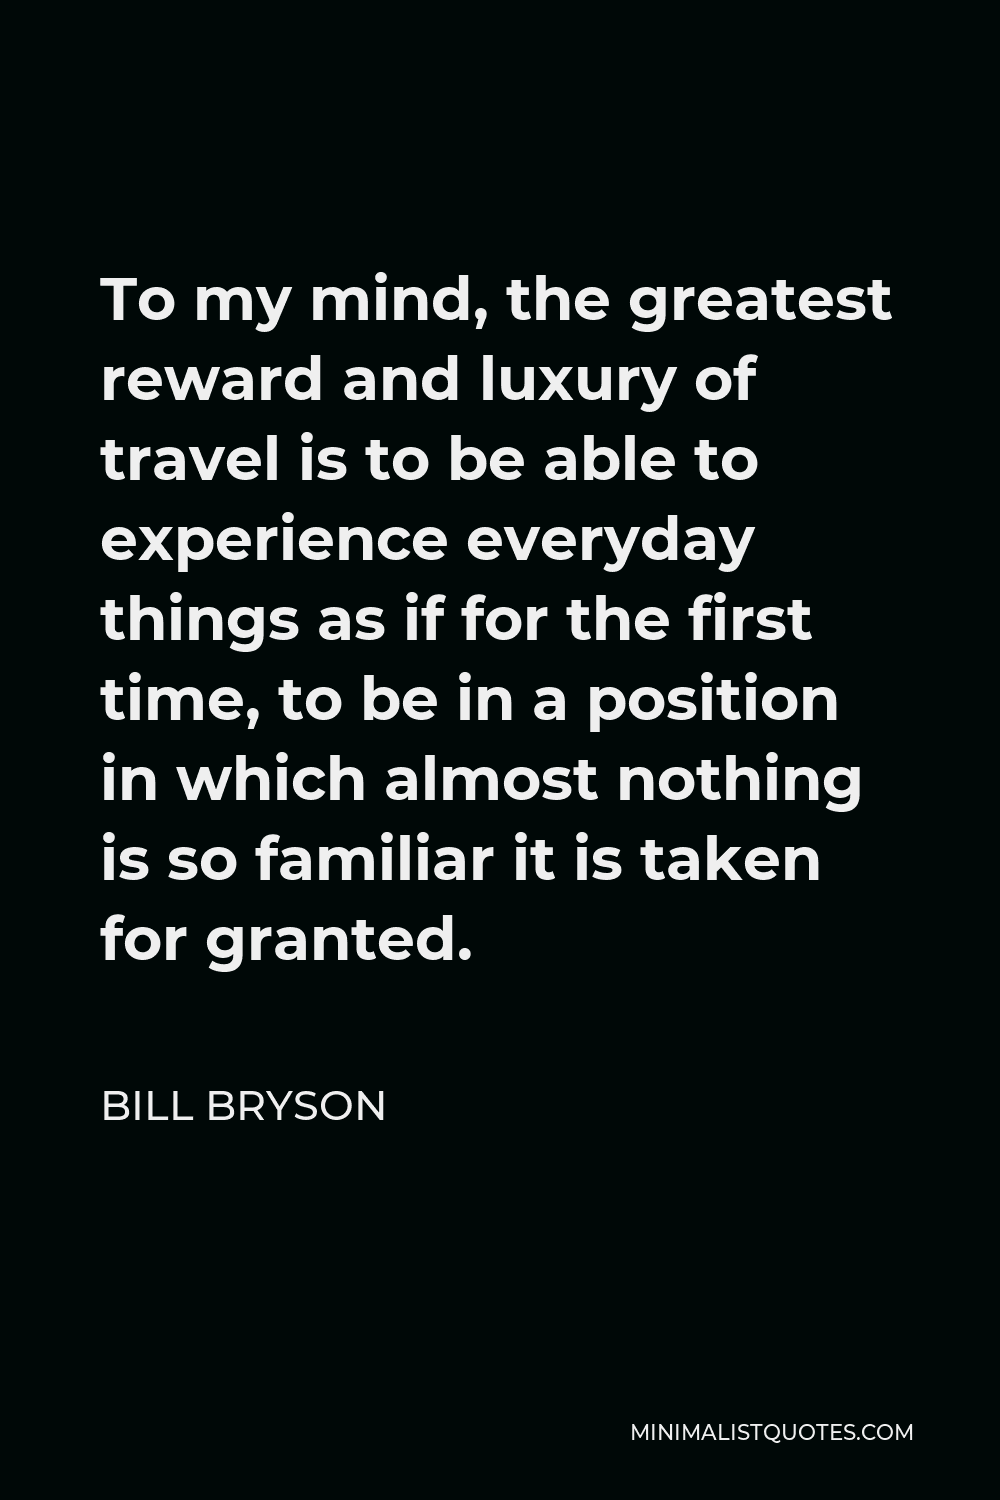 Bill Bryson Quote - To my mind, the greatest reward and luxury of travel is to be able to experience everyday things as if for the first time, to be in a position in which almost nothing is so familiar it is taken for granted.